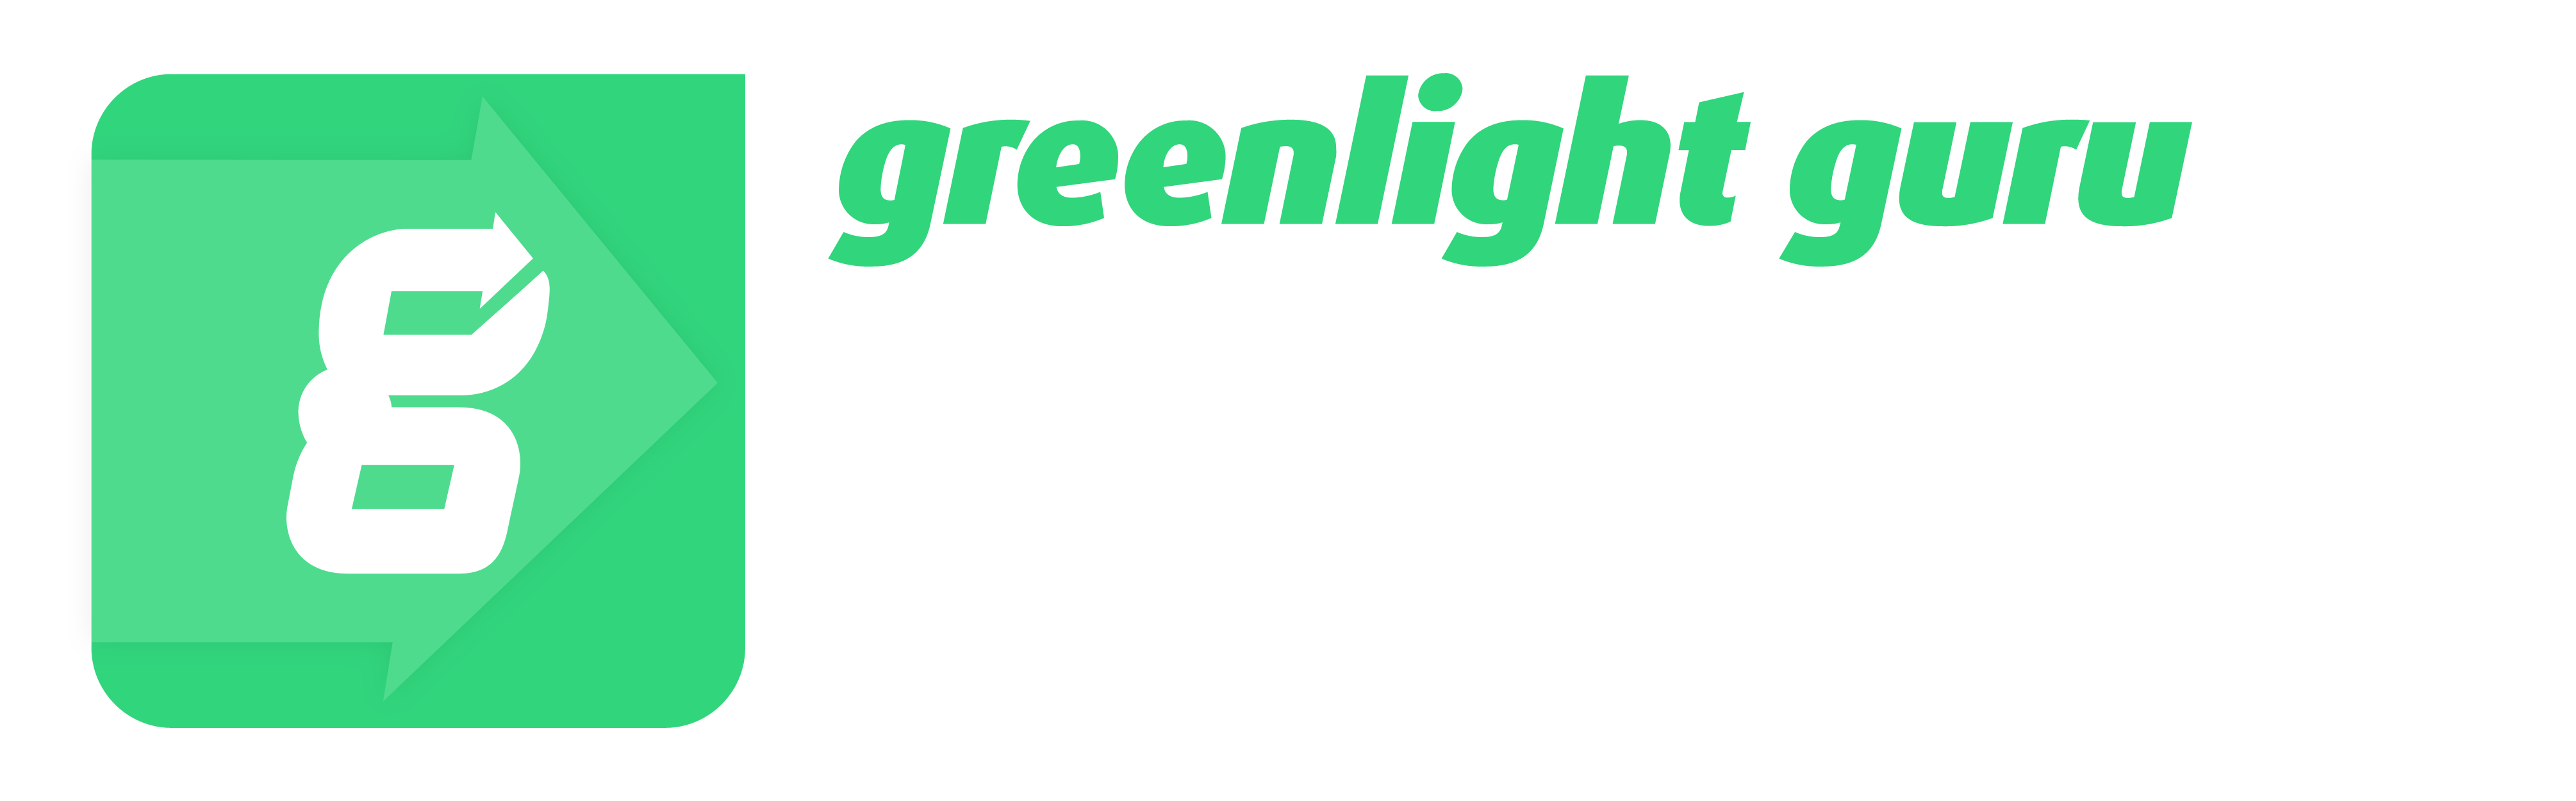 pricing page greenlight guru clinical